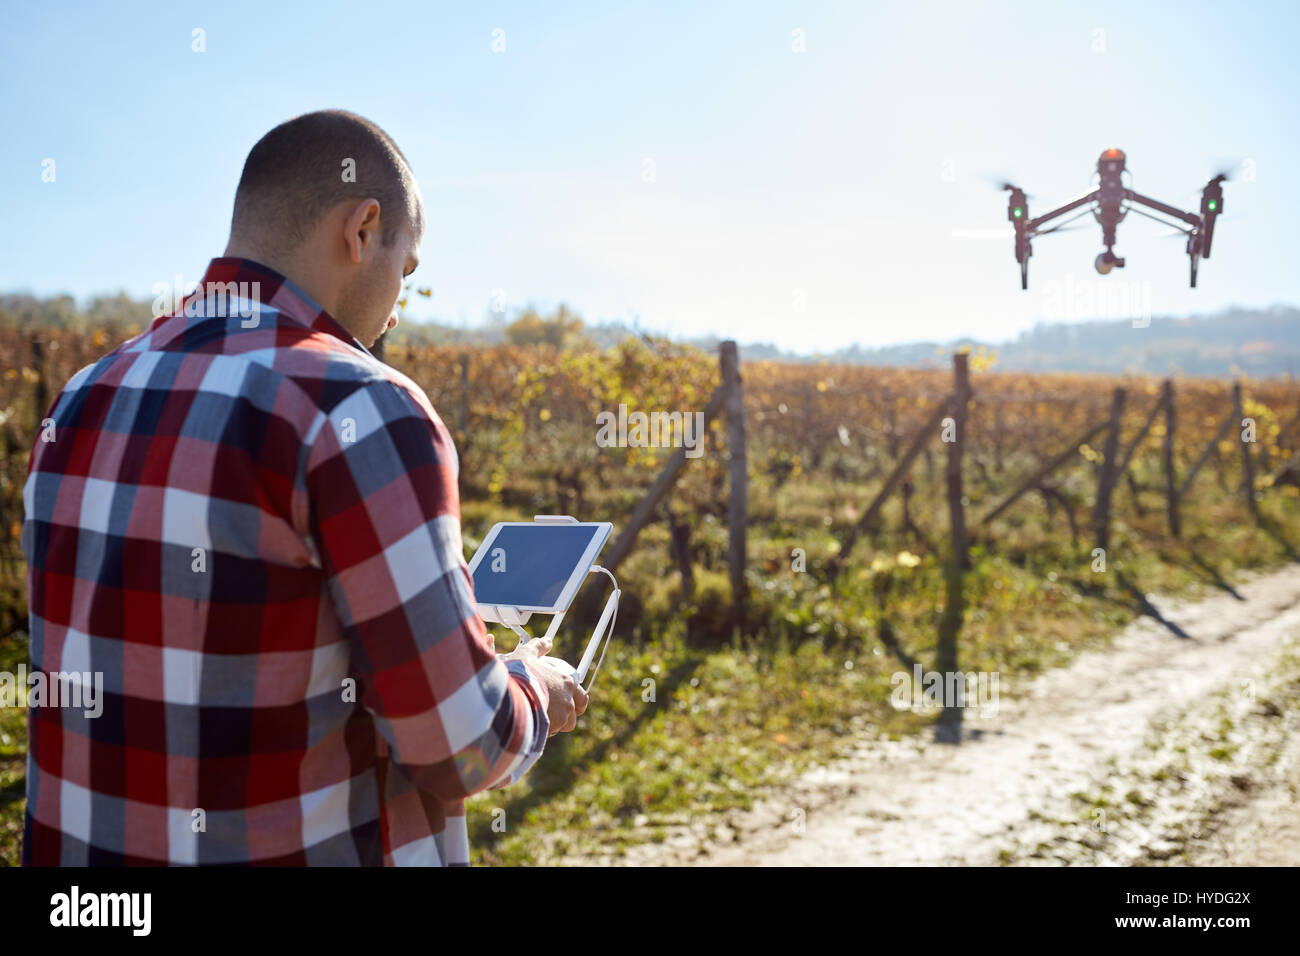 Man remote control flying drone over vineyard Stock Photo